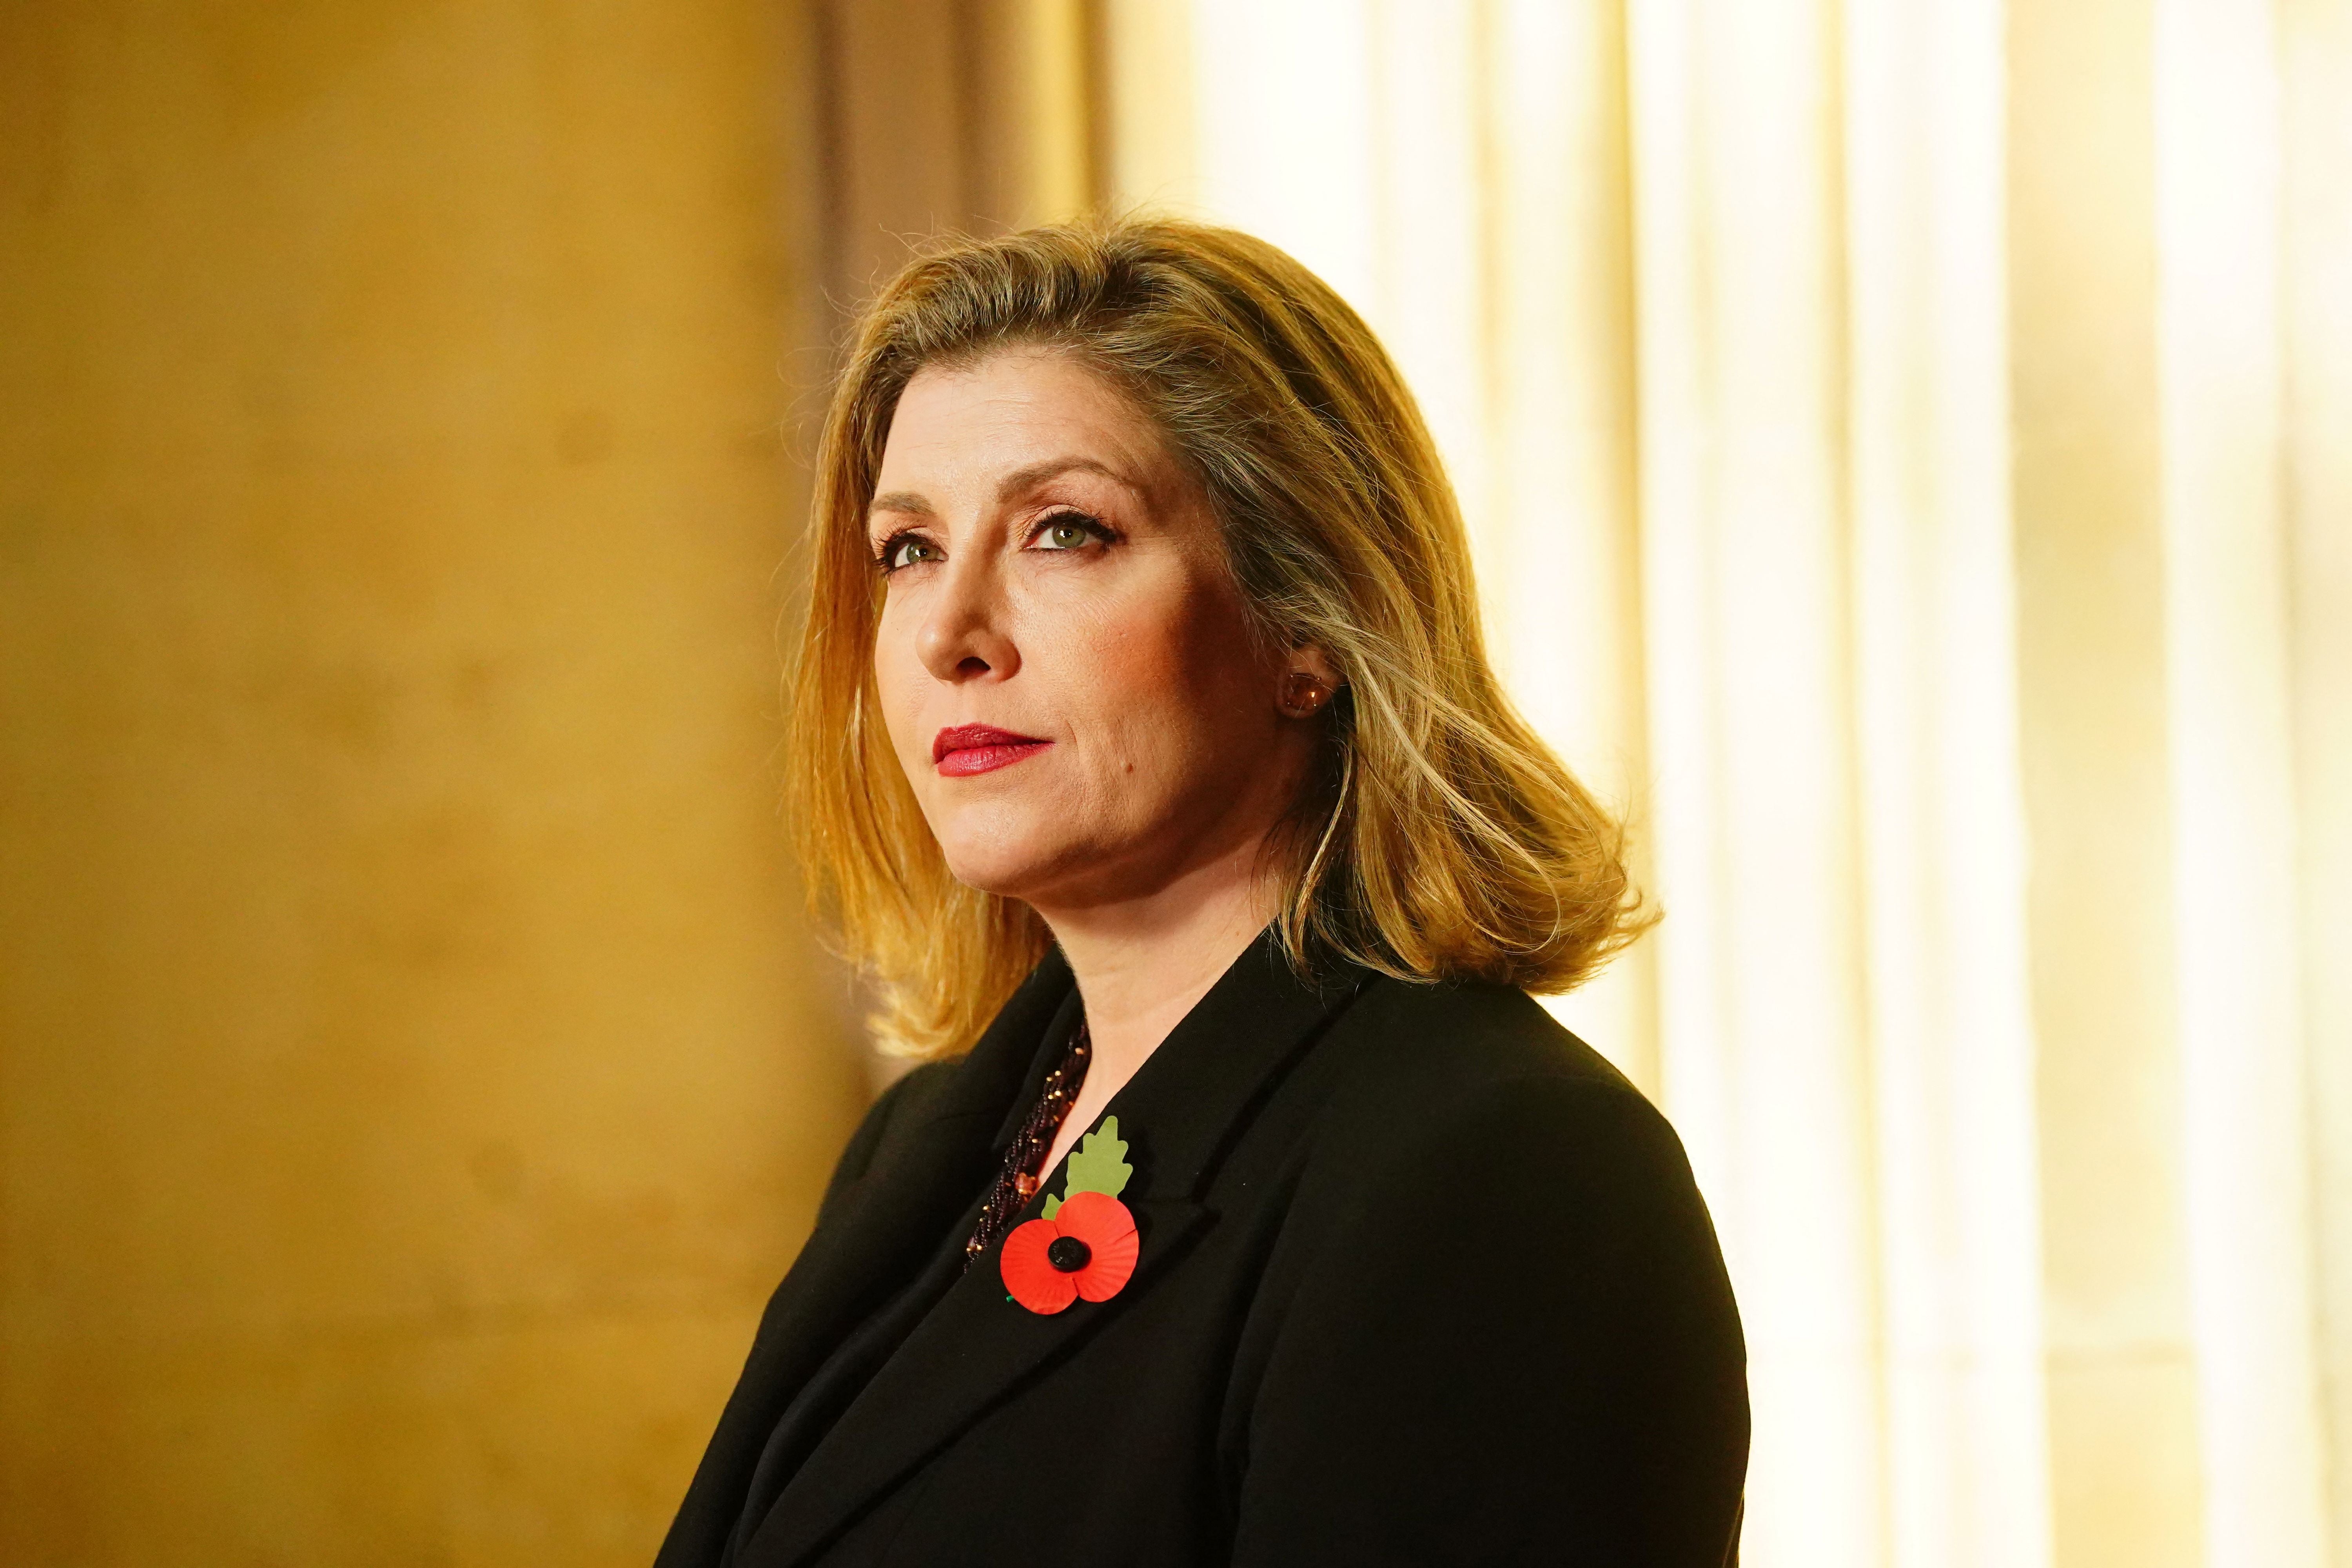 Opinion polls from Savanta and Michael Ashcroft show that Mordaunt is the most popular leading Conservative